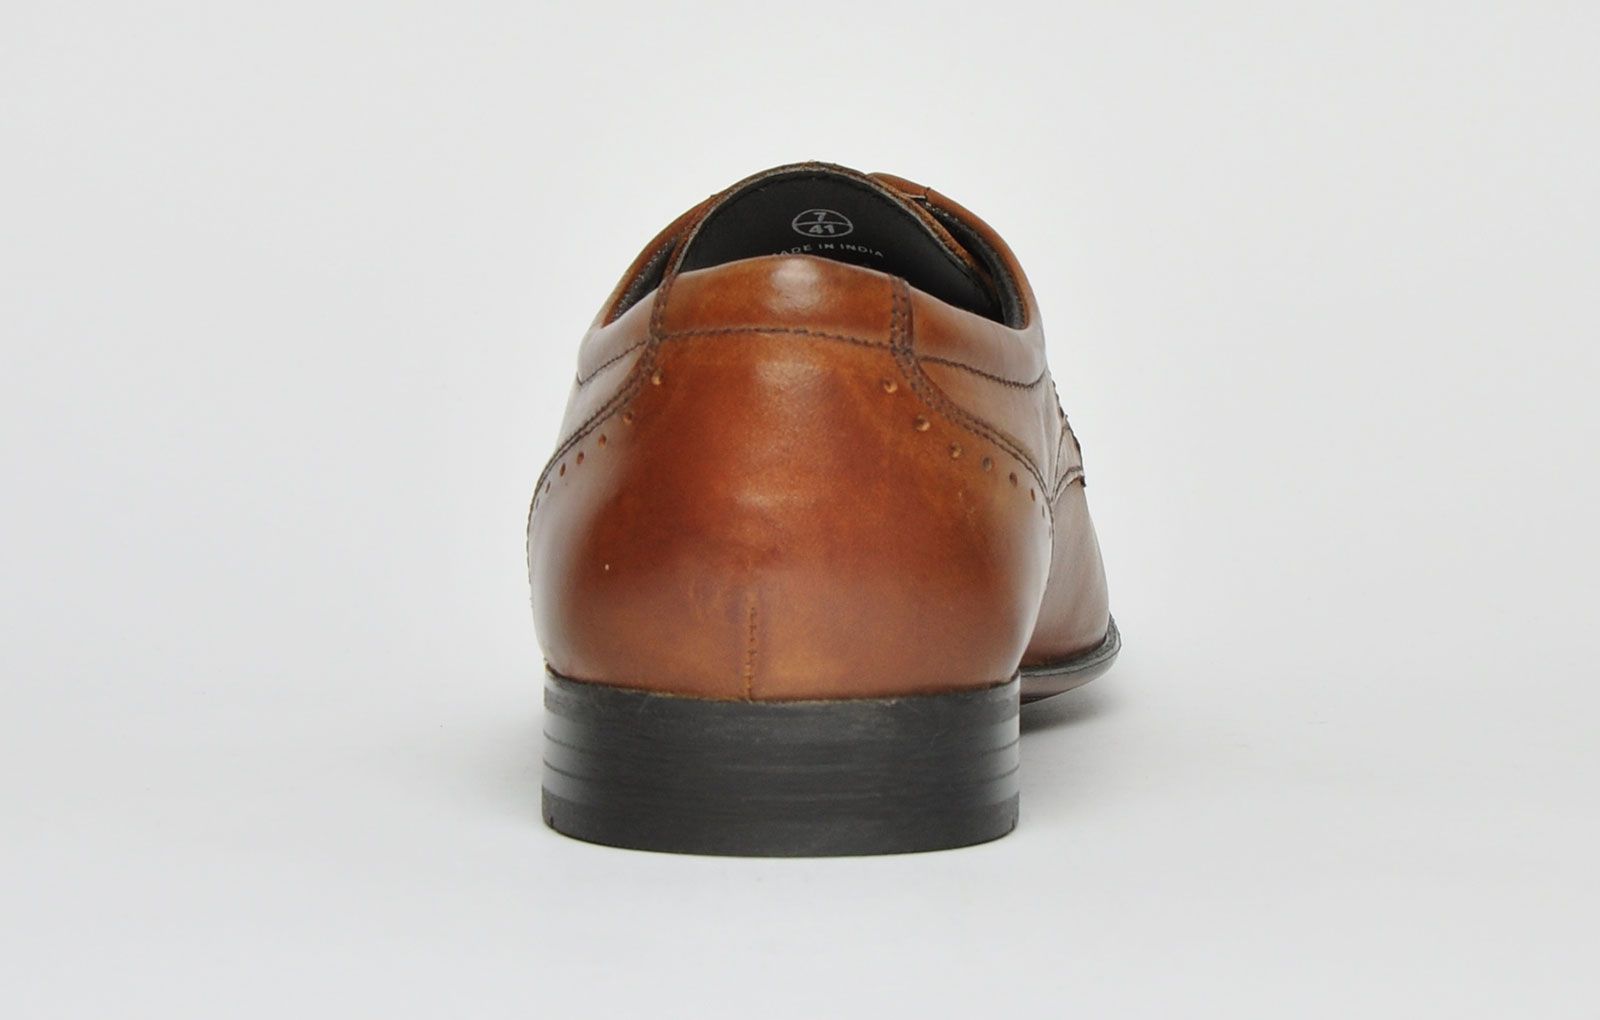 These Ikon men’s premium leather shoes will make a perfect addition to your footwear collection. <p>Engineered for the modern-day man these stylish leather shoes are crammed full of vintage charisma. The Slimline silhouette is crafted using premium leathers, finished with neat panel construction and tonal stitching for a timeless retro look</p> <p>These Ikon Fraser men’s shoes feature a 3 lace up front fastening, combined with a premium leather/textile inner lining, providing a comfortable and secure fit throughout your day</p> <p style=